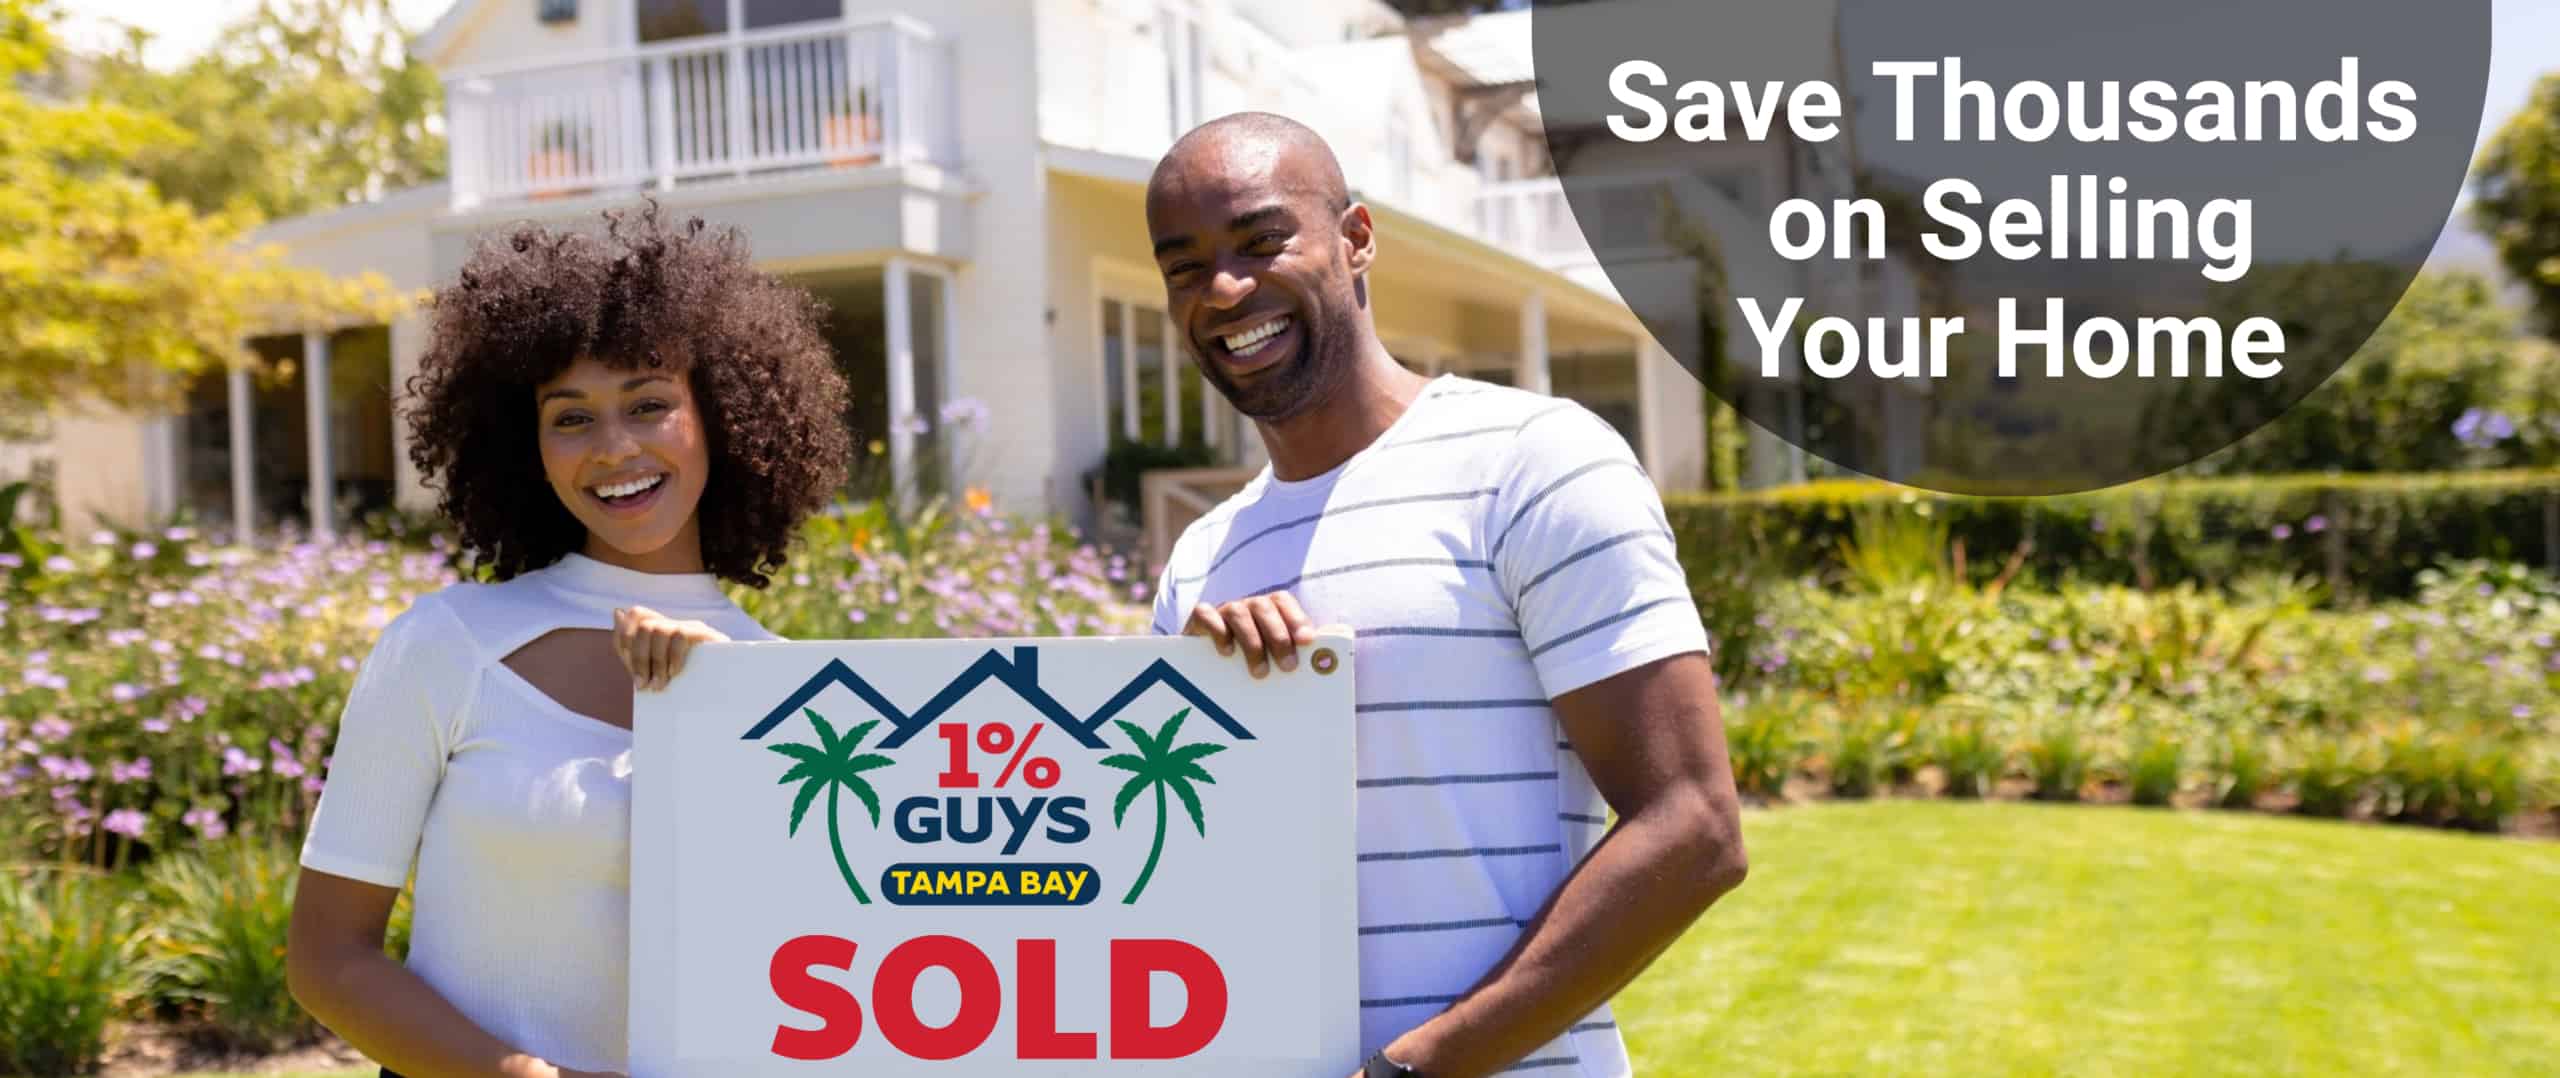 Save Thousands on Selling Your Home